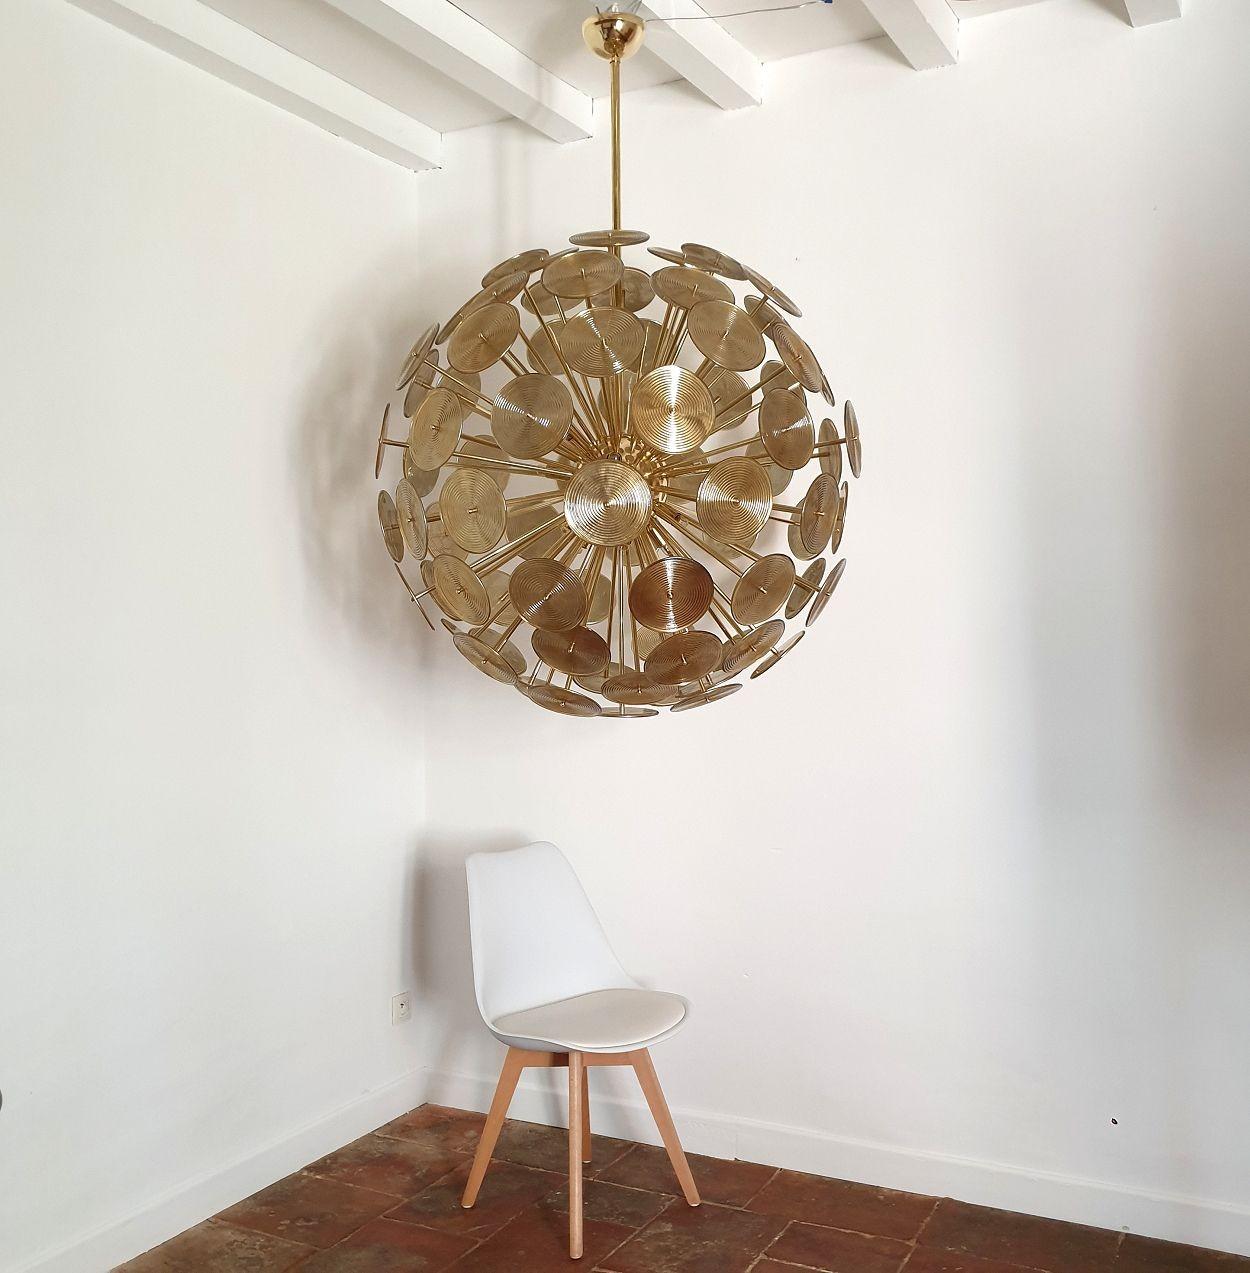 Huge Mid Century Modern Murano glass Sputnik chandelier, Vistosi style Italy 1980s.
The large Italian chandelier is made of gold color Murano glass discs, with circles in relief on the outside face.
The Murano glass discs let some light through.
The